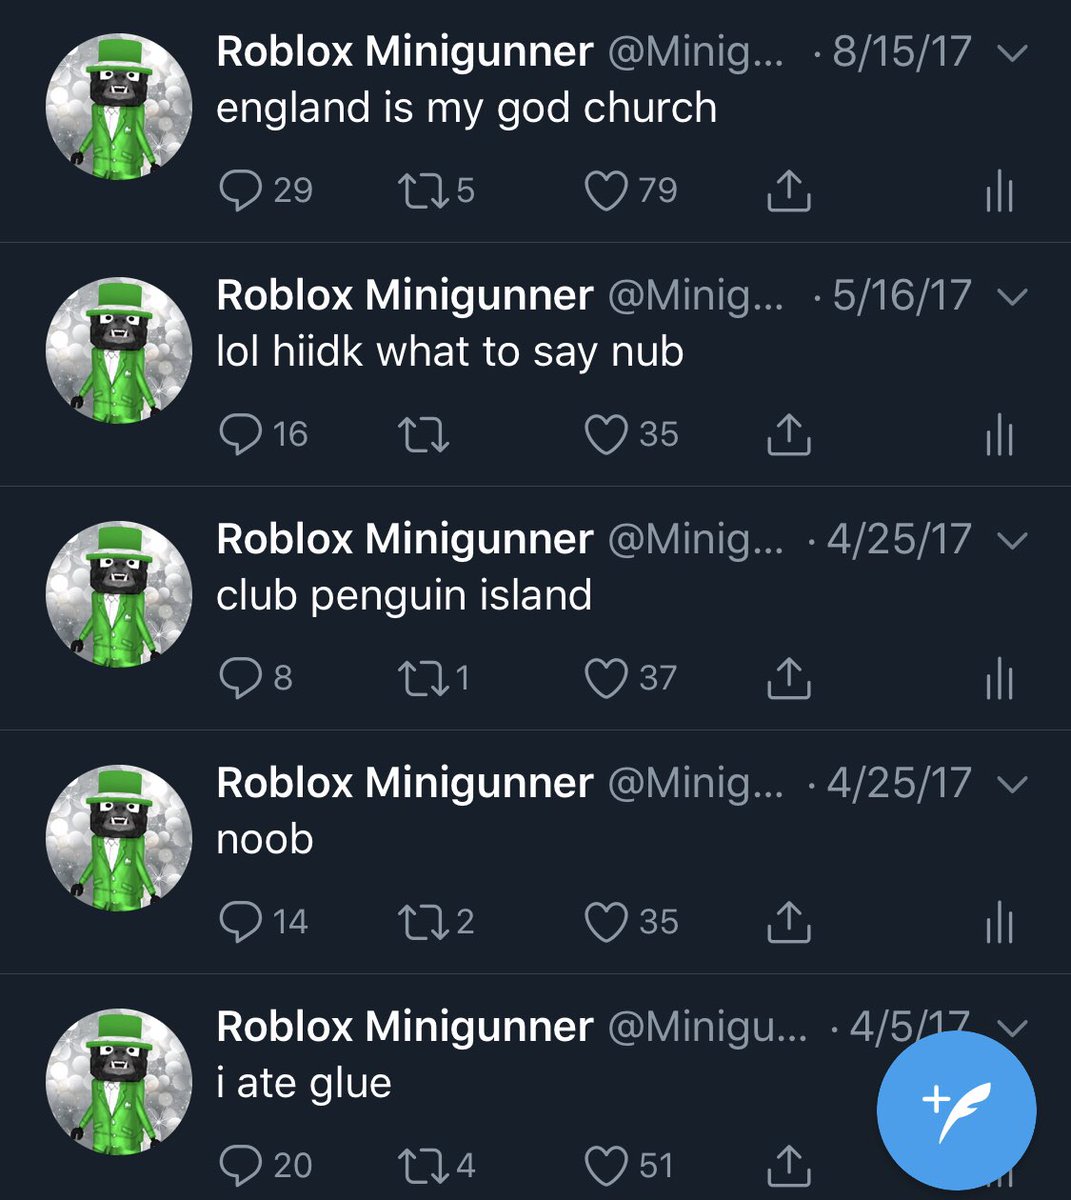 Roblox Minigunner On Twitter My First Ever Tweets Were Gold I Wonder What I Was Thinking When I Posted These Lol - mini gunner roblox